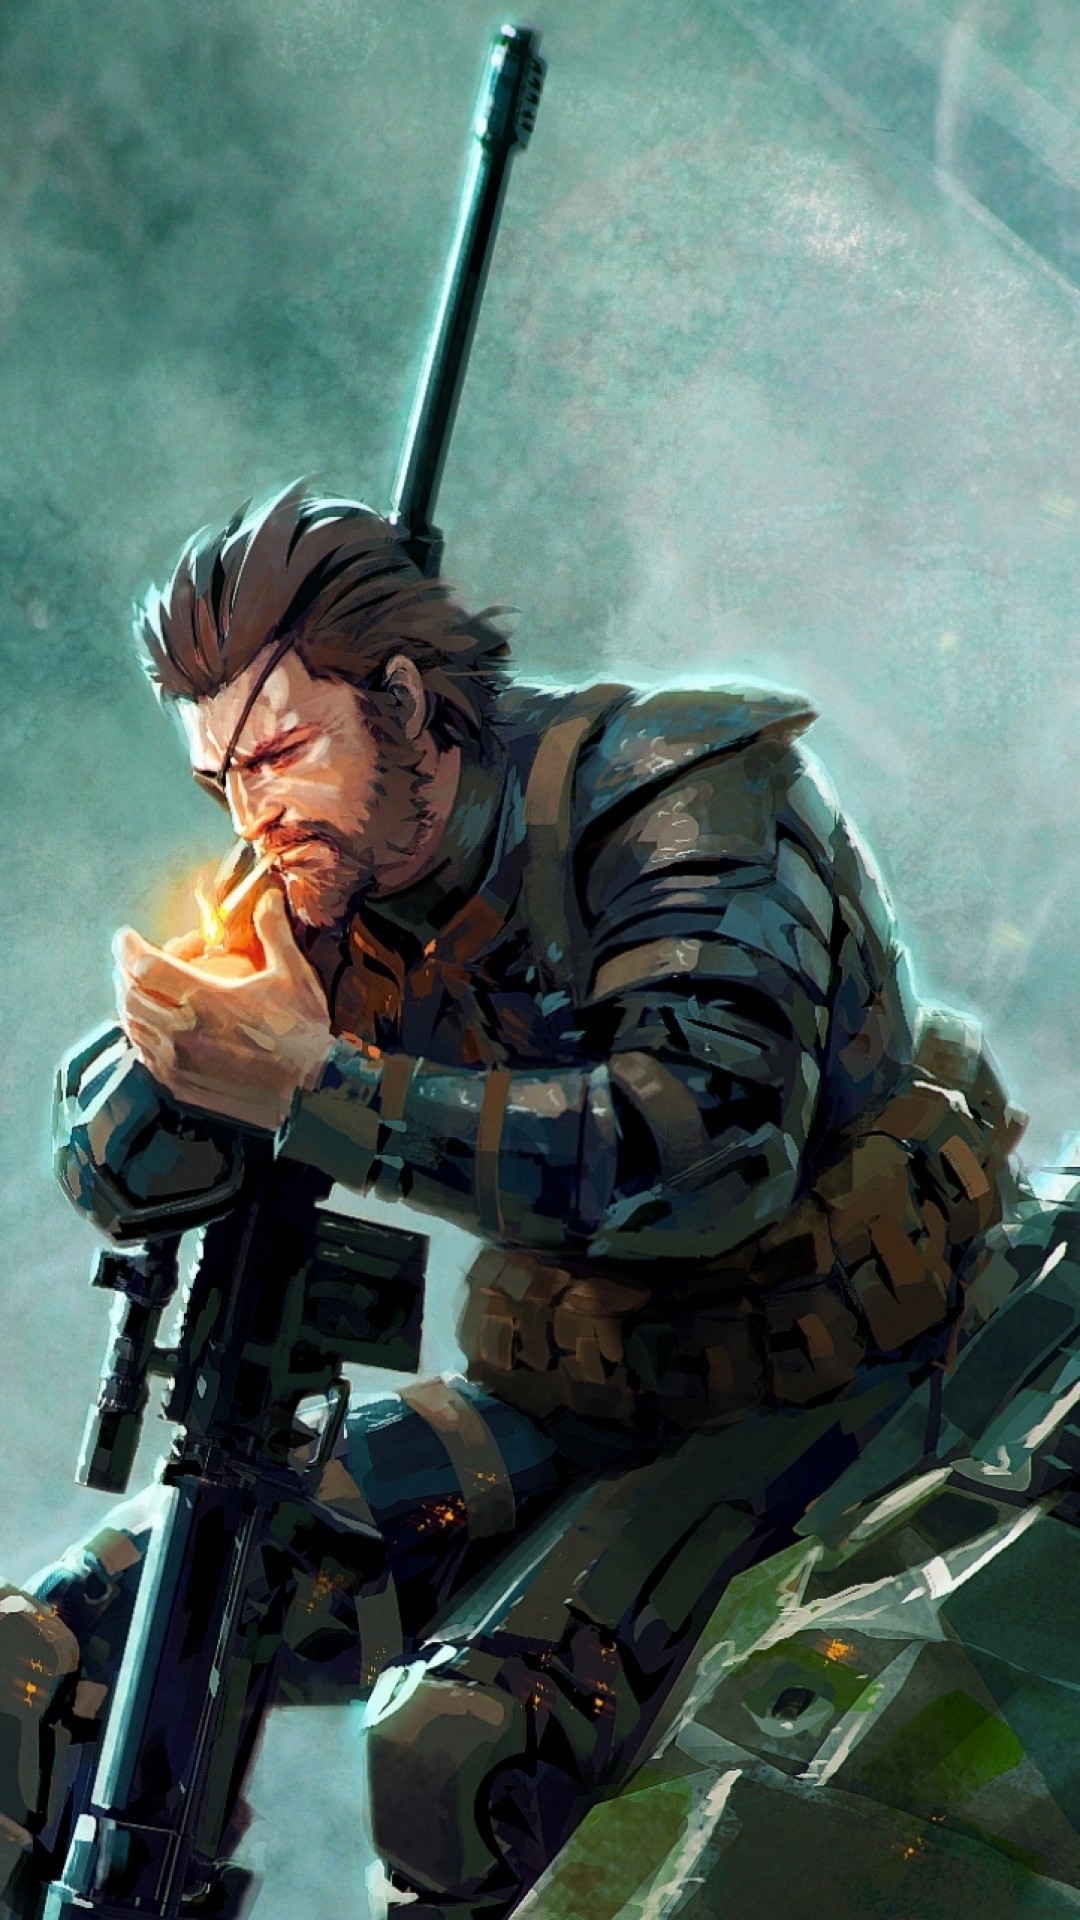 Metal Gear Solid Wallpaper Action Adventure Game Soldier Movie Cg Artwork Pc Game 790 Wallpaperuse